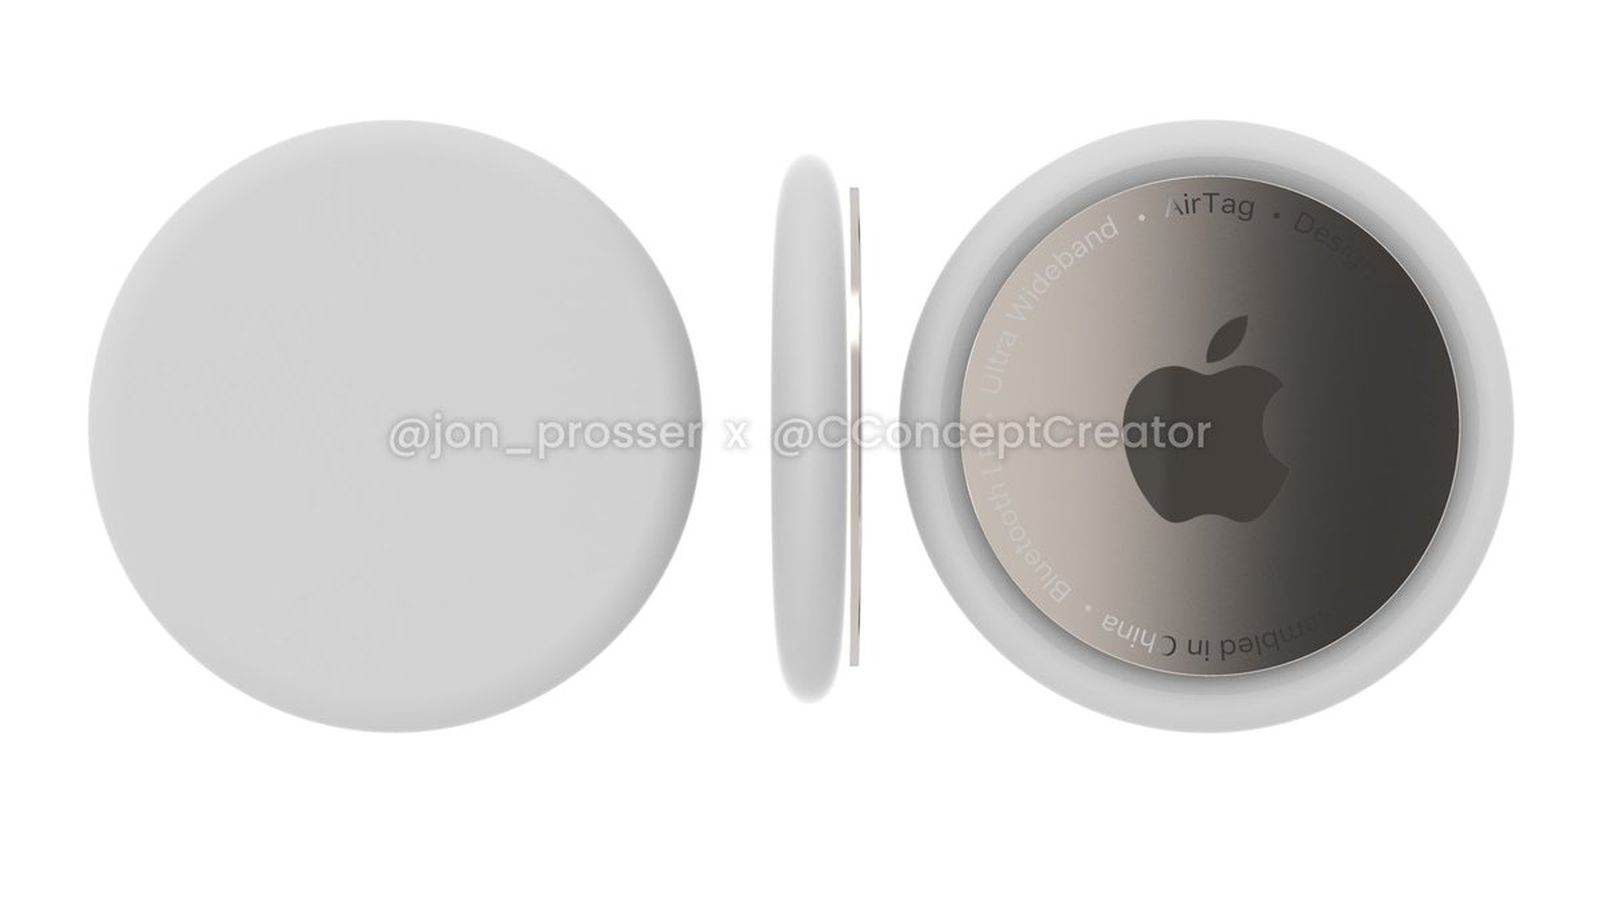 Prosser Renders 'Actual' AirTags Design, Will 'Likely' Be Announced Tomorrow - MacRumors